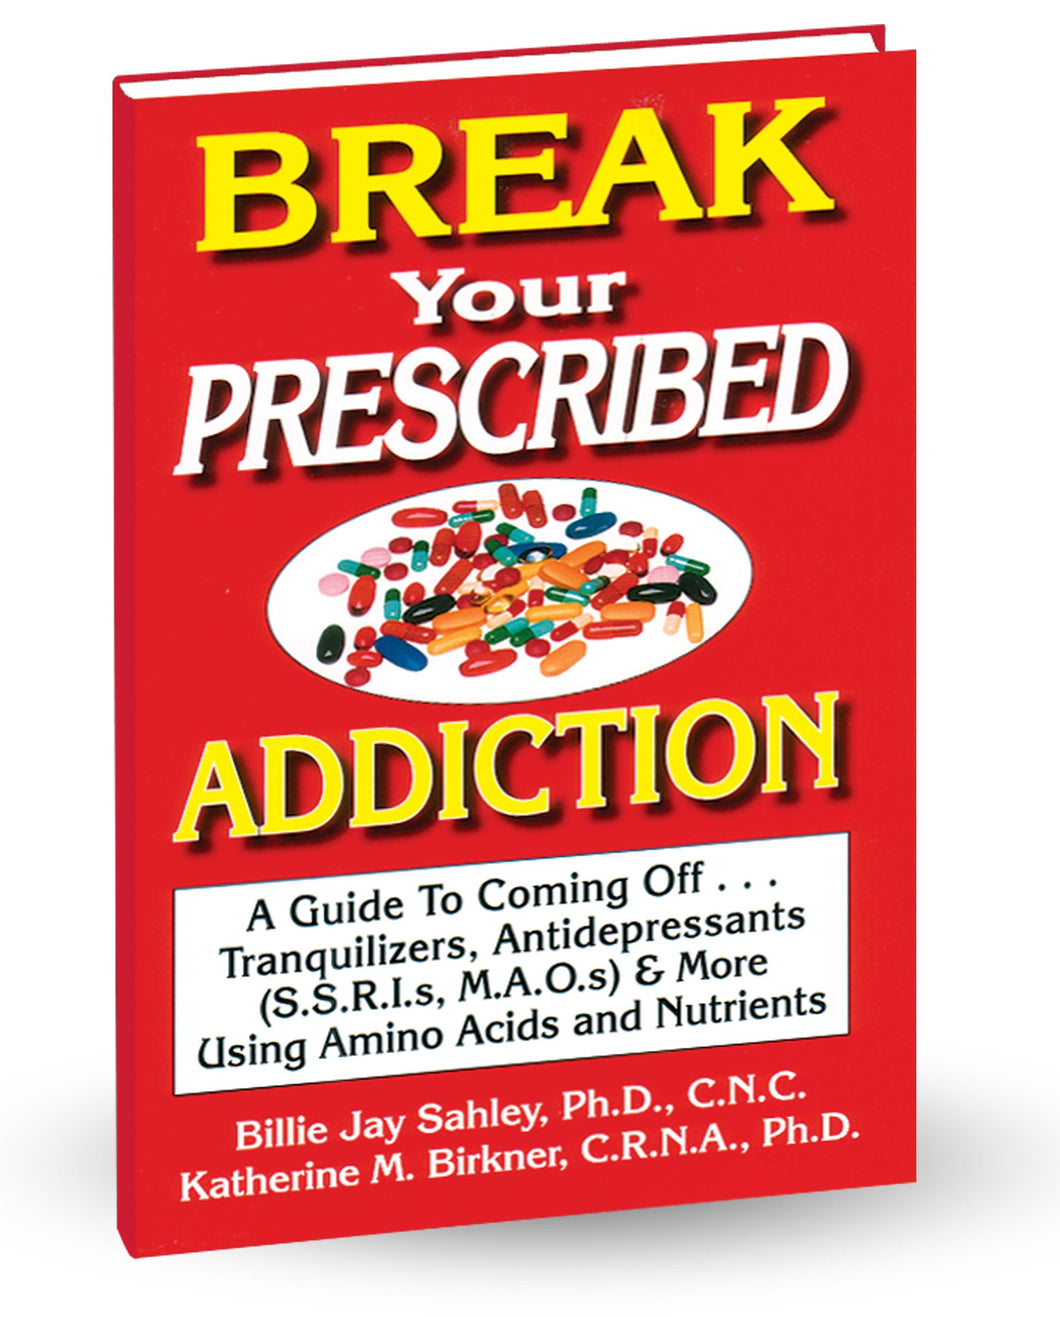 Break Your Prescribed Addiction by Billie Jay Sahley, PhD., C.N.C. and Katherine M. Birkner, C.R.N.A., PhD. C.N.C.  A Guide to Coming Off Tranquilizers, Antidepressants (SSRIs, MAOs), Pain Pills, and More using Amino Acids and Nutrients!